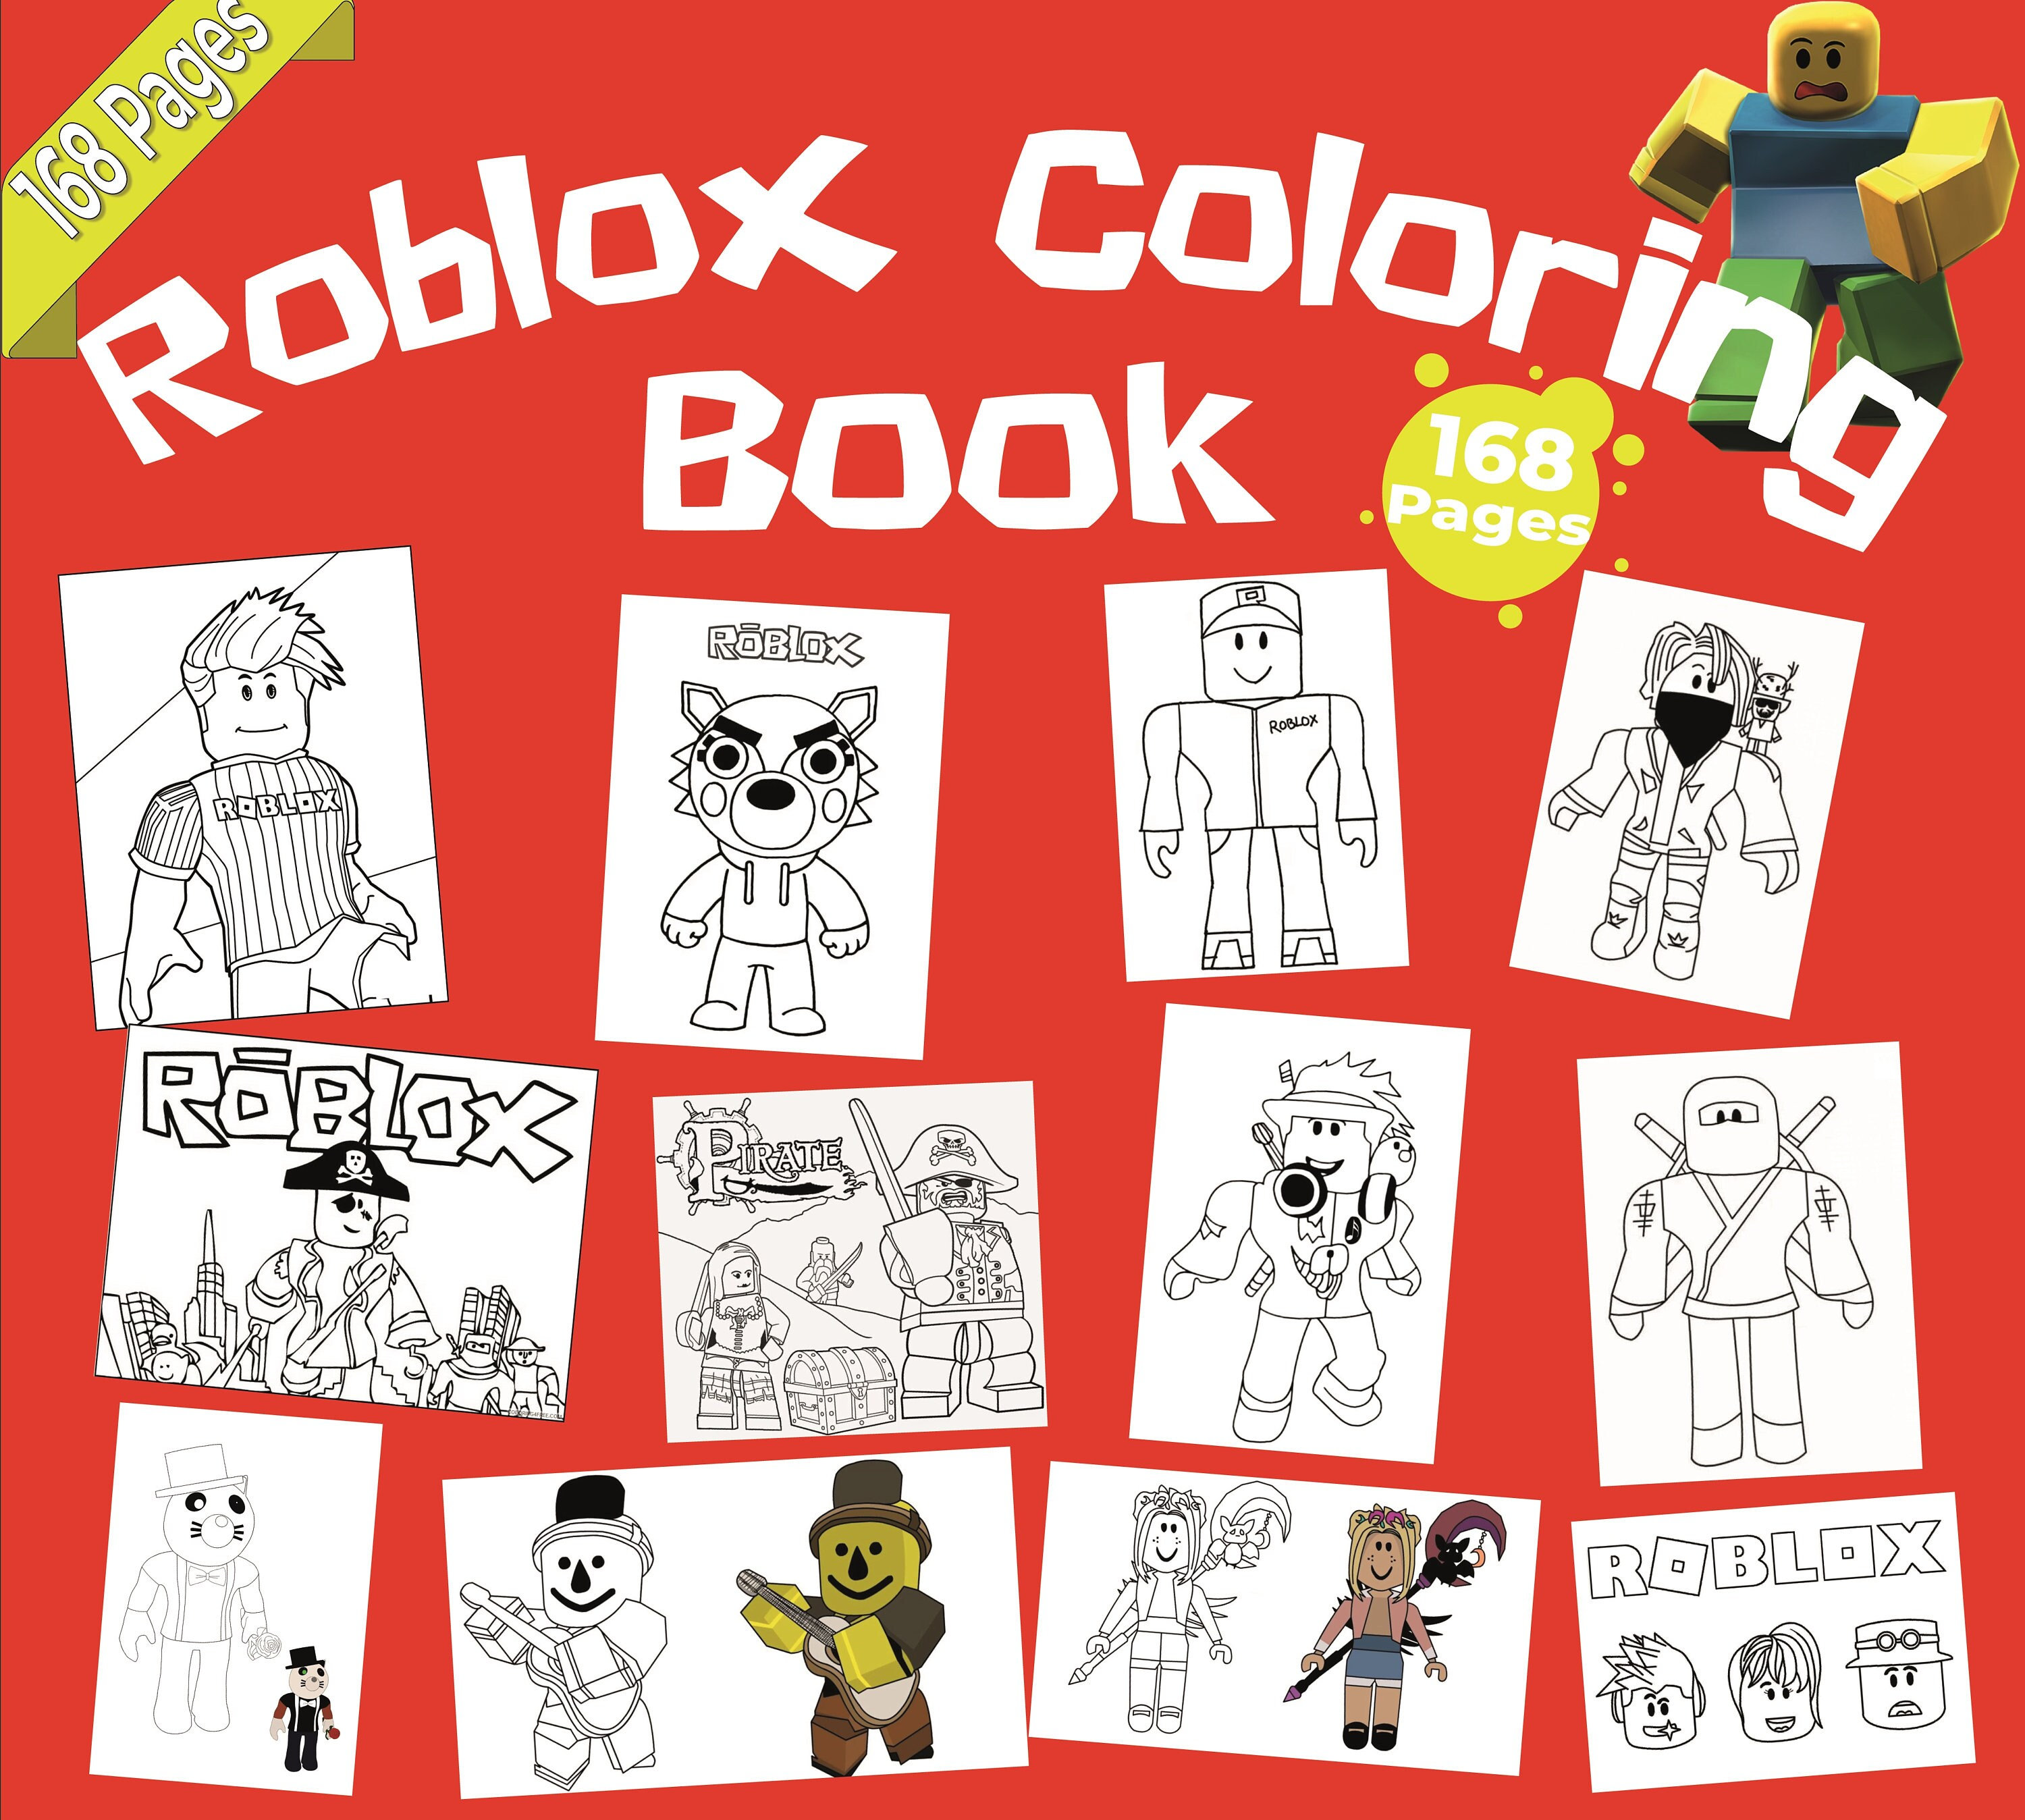 Roblox Coloring Pages - Free Printable Coloring Pages for Kids